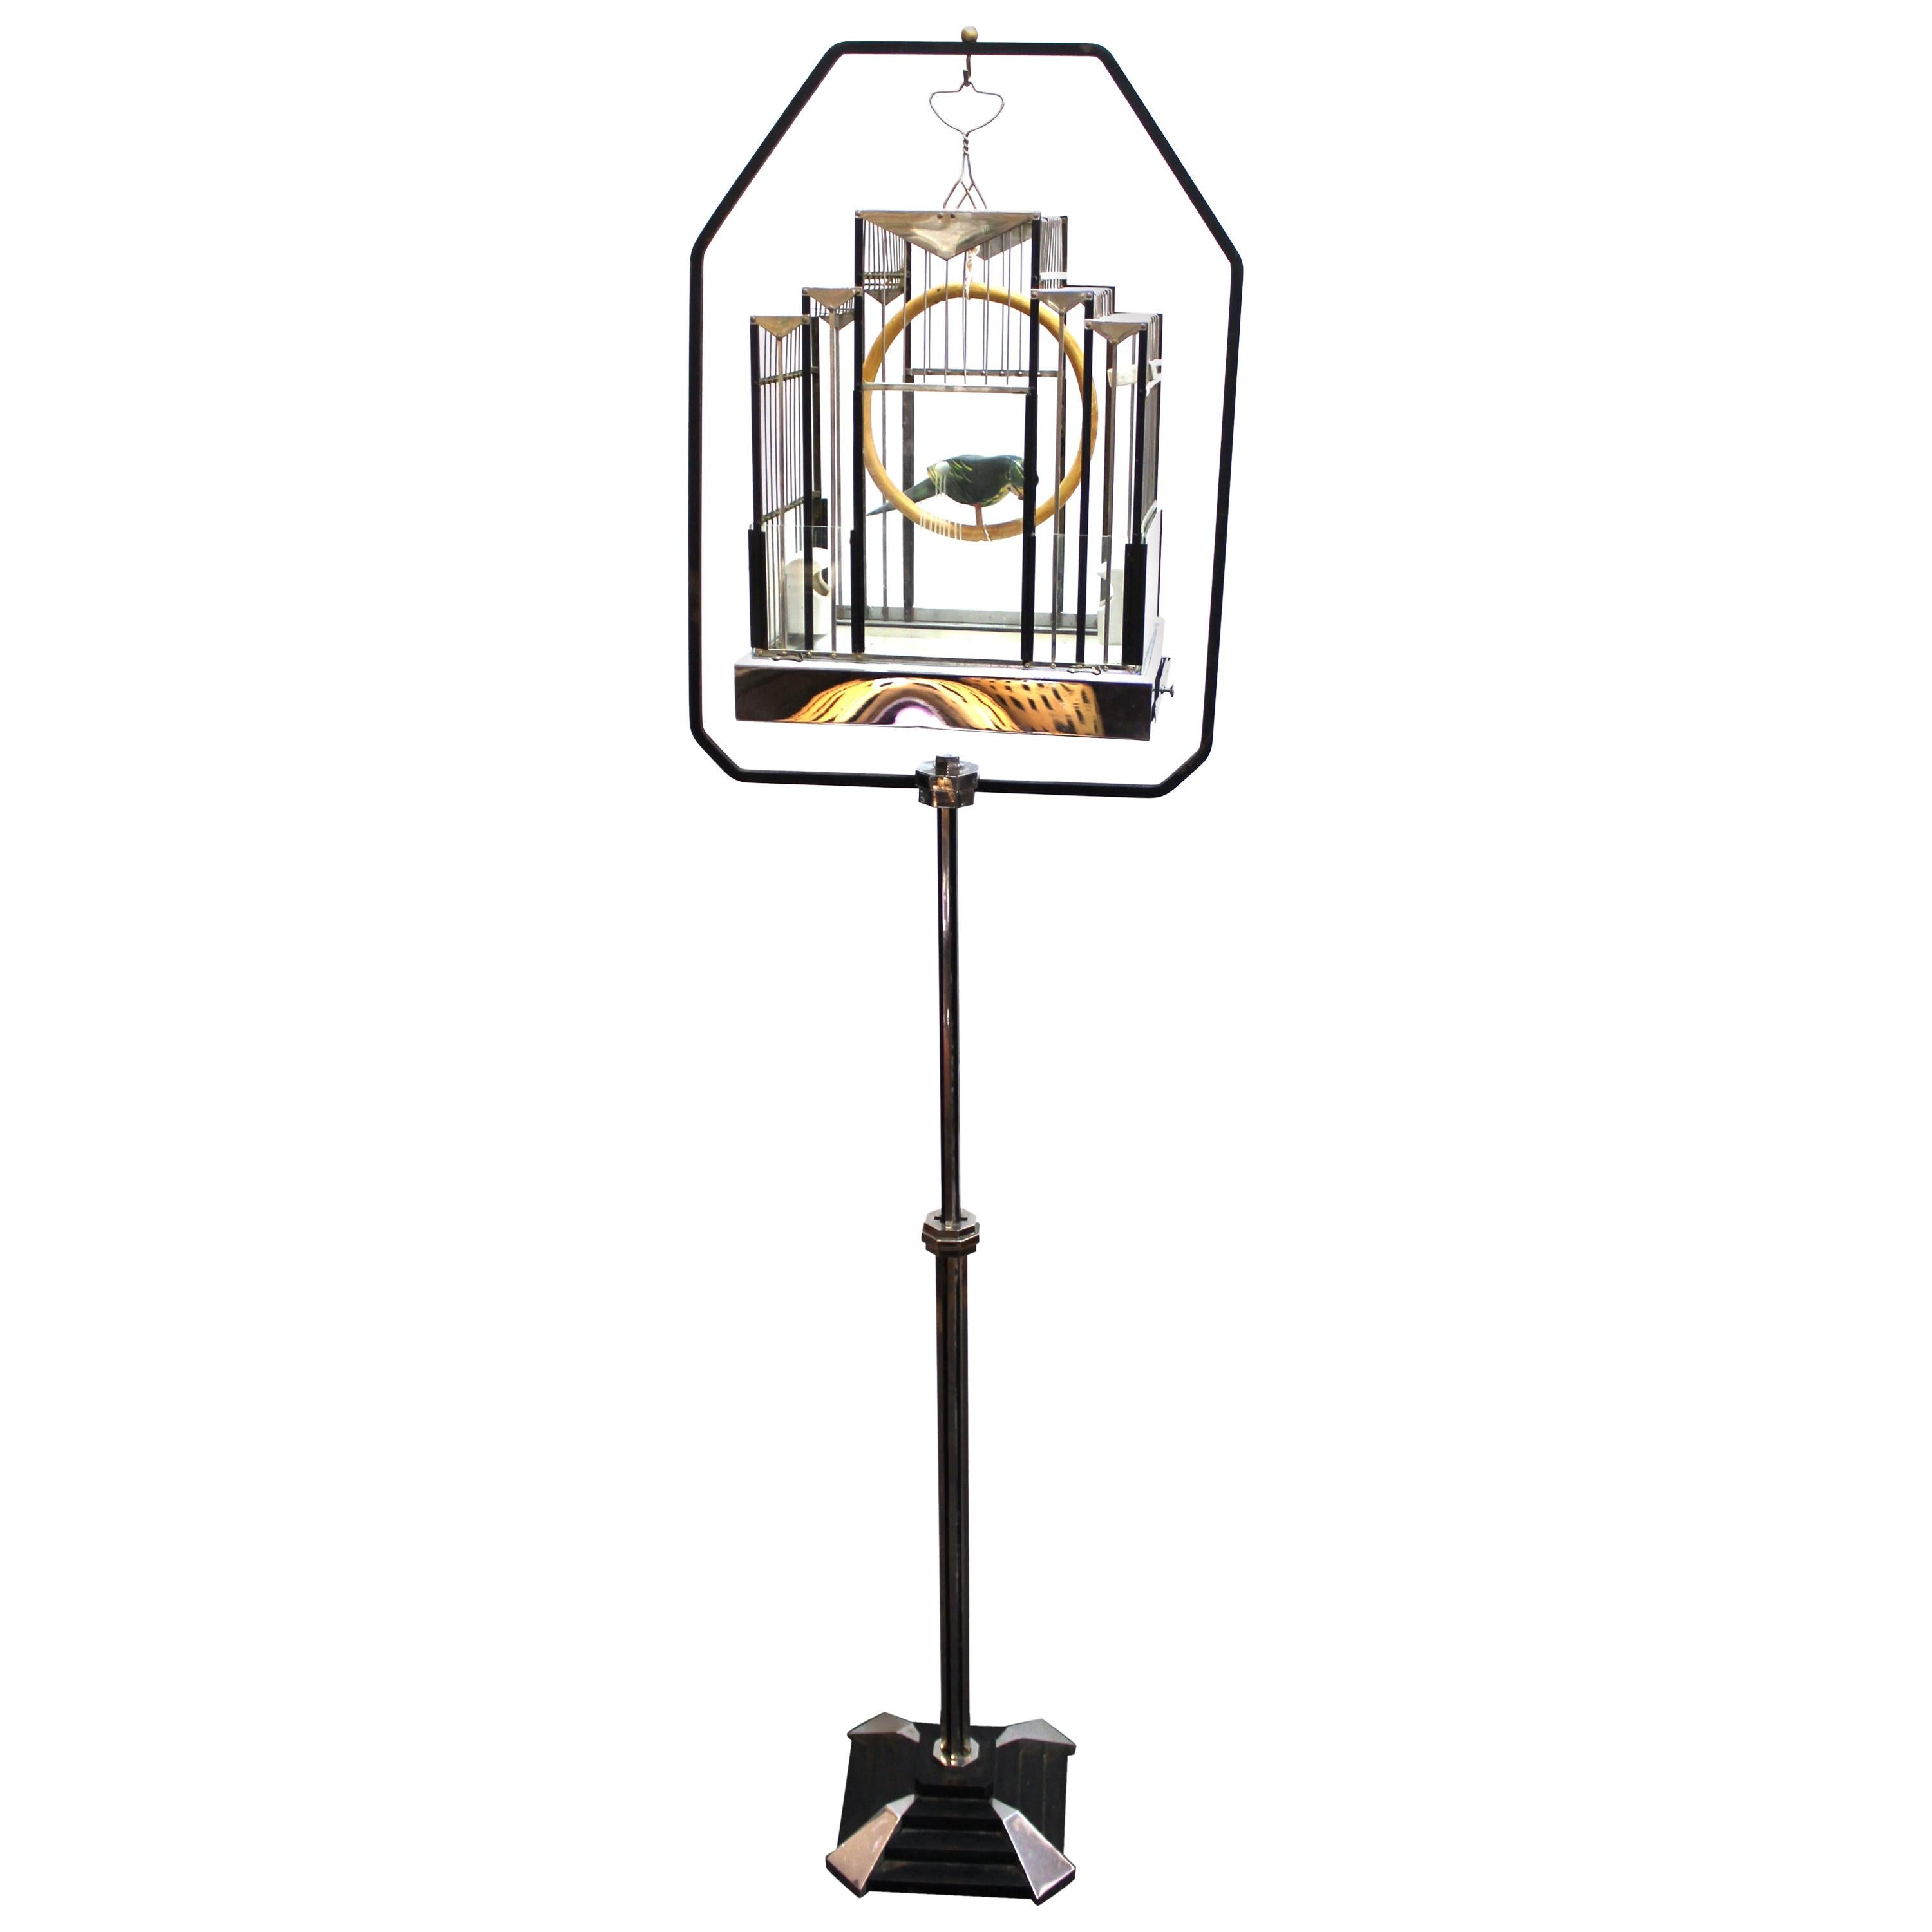 Art Deco Birdcage with Glass and Chrome Accents